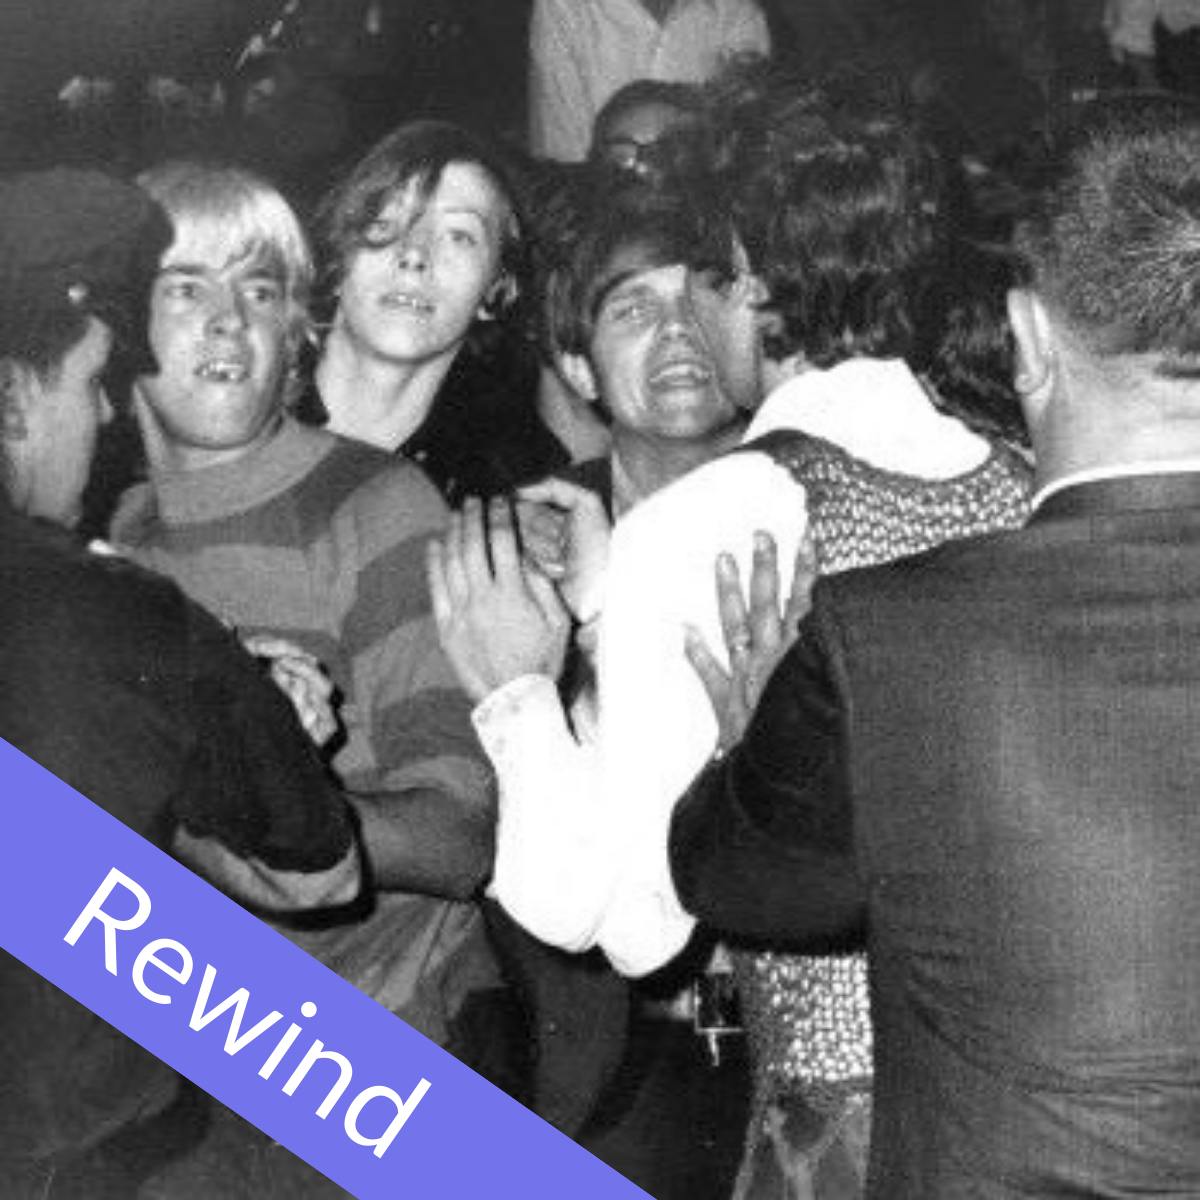 Rewind: Stonewall 50: Episode 2: "Everything Clicked… And the Riot Was On"